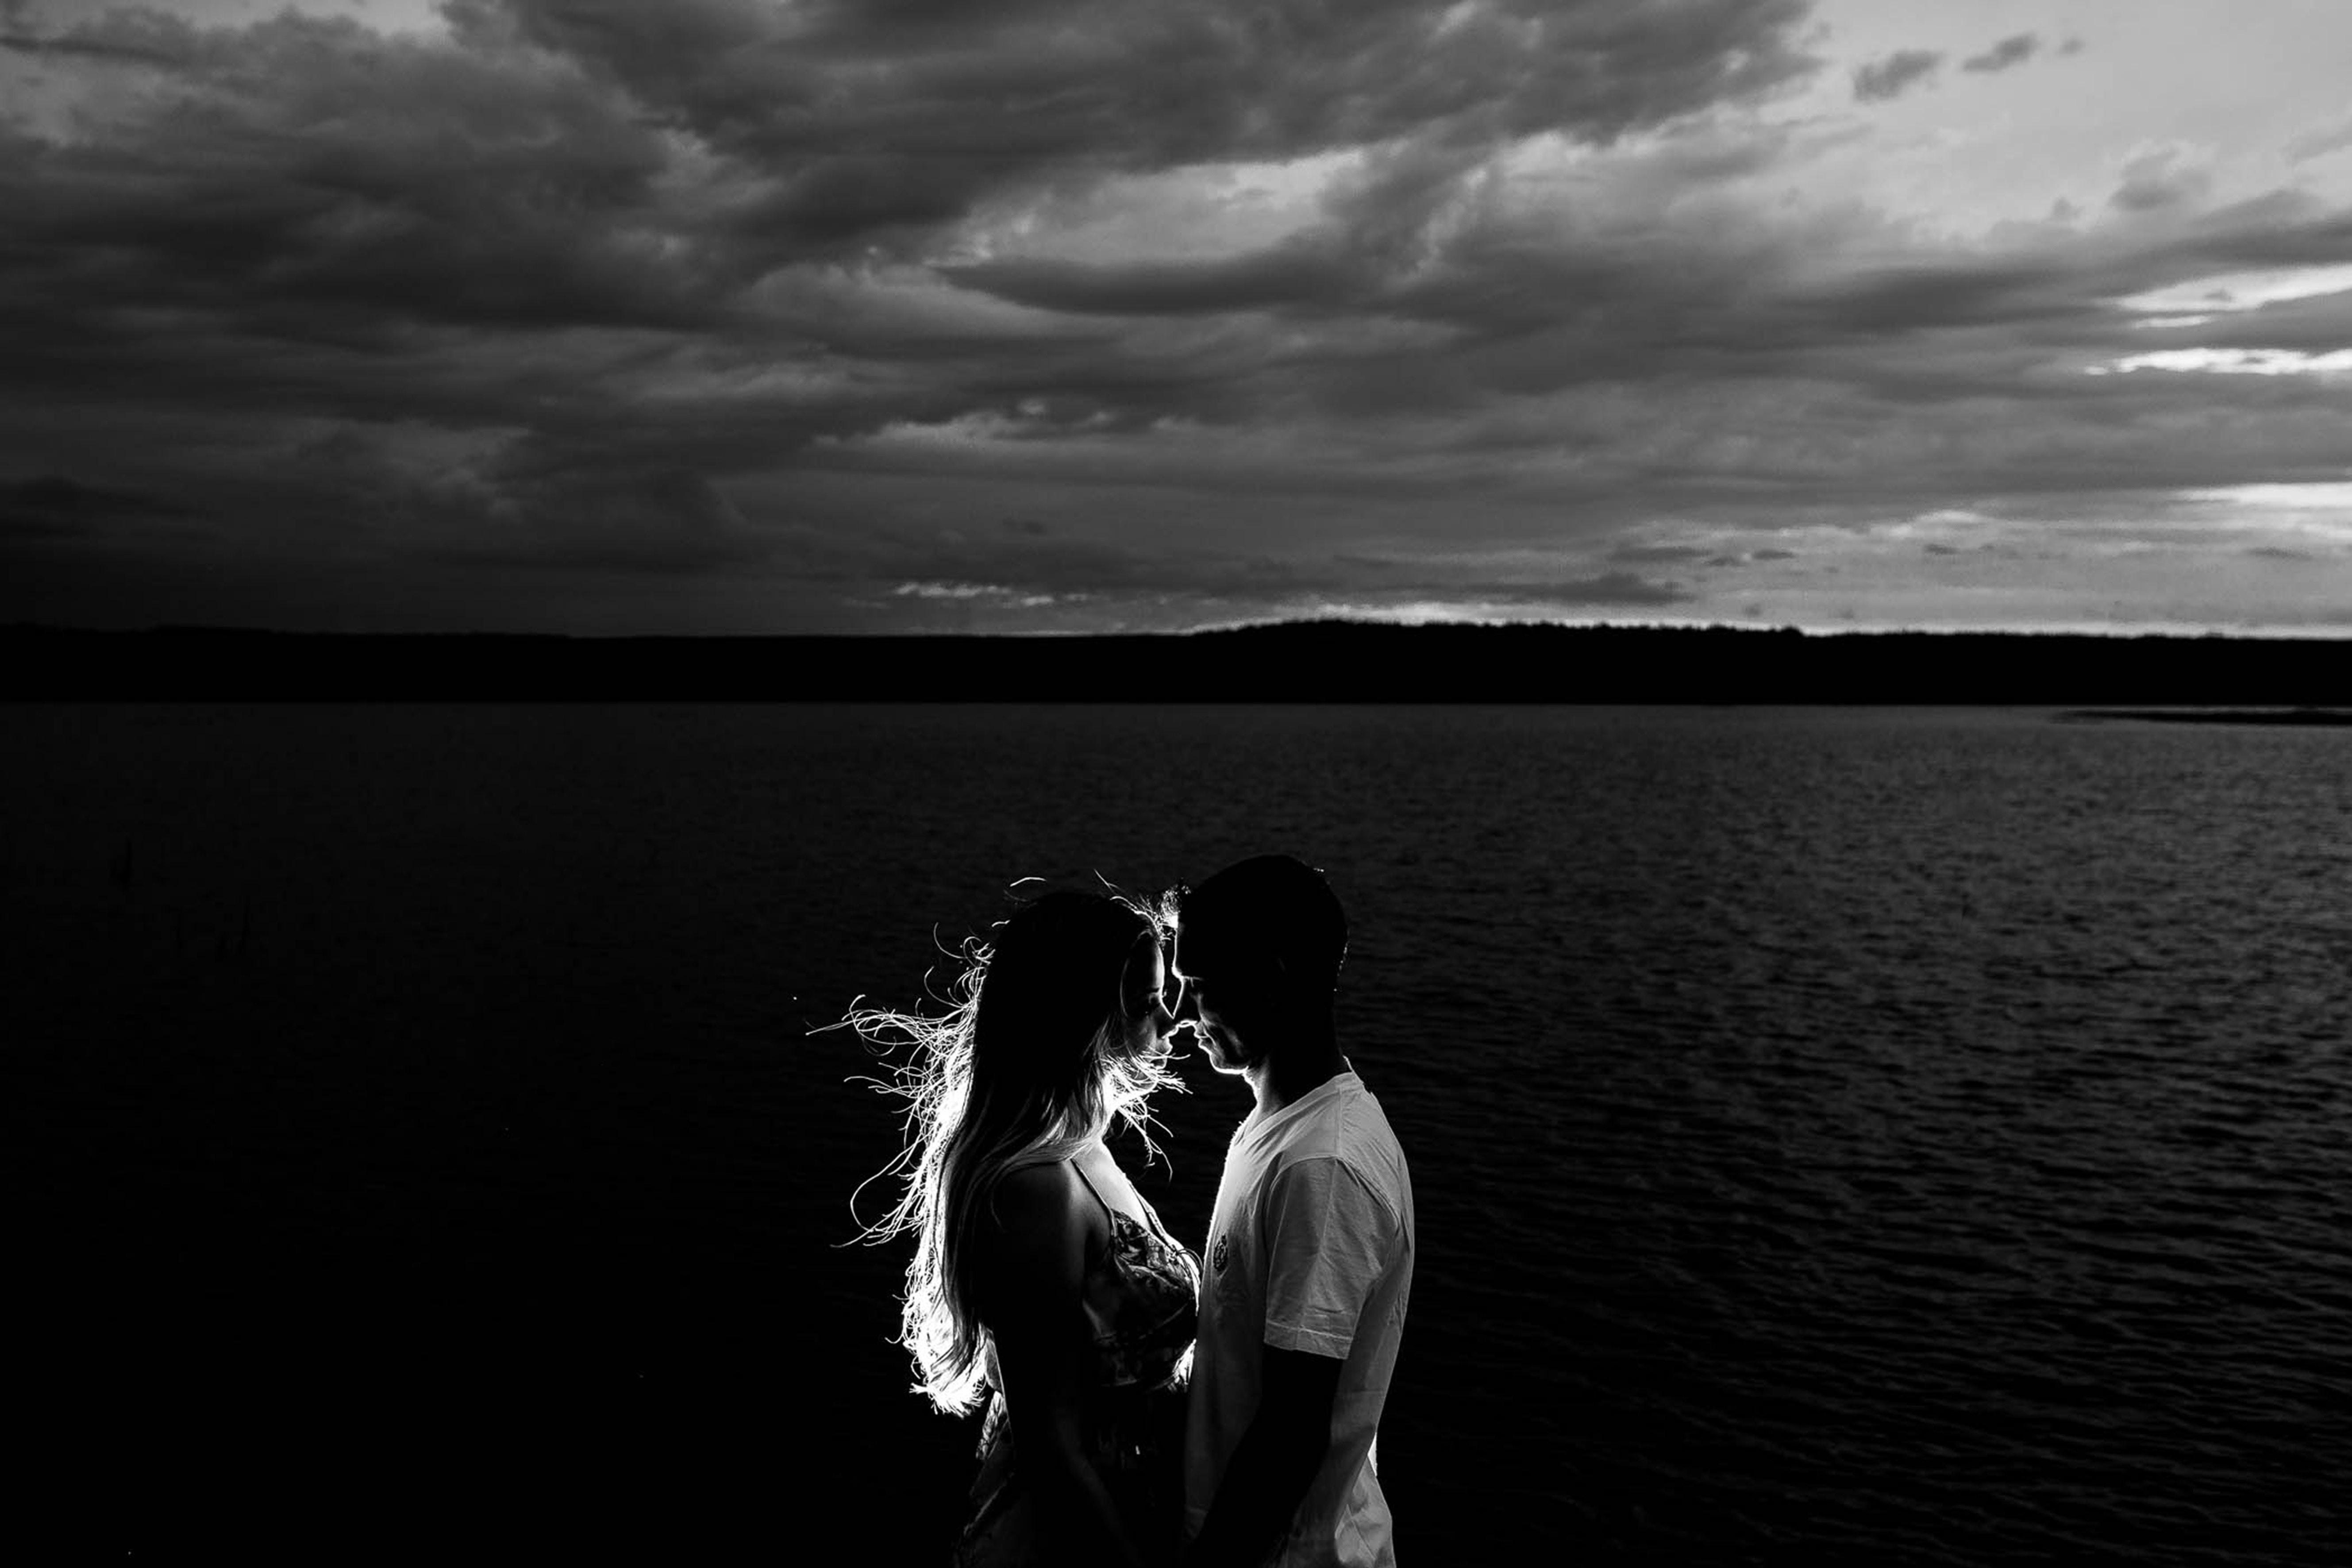 5315x3543 #cloud, #Creative Commons image, #love, #black and white, #photography, #together, #wallpaper, #couple, #duo, #luz, #nature, #backlit, #love wallpaper, #bride, #express, #wedding, #wedding dress, #horizon, #horizon line, #water